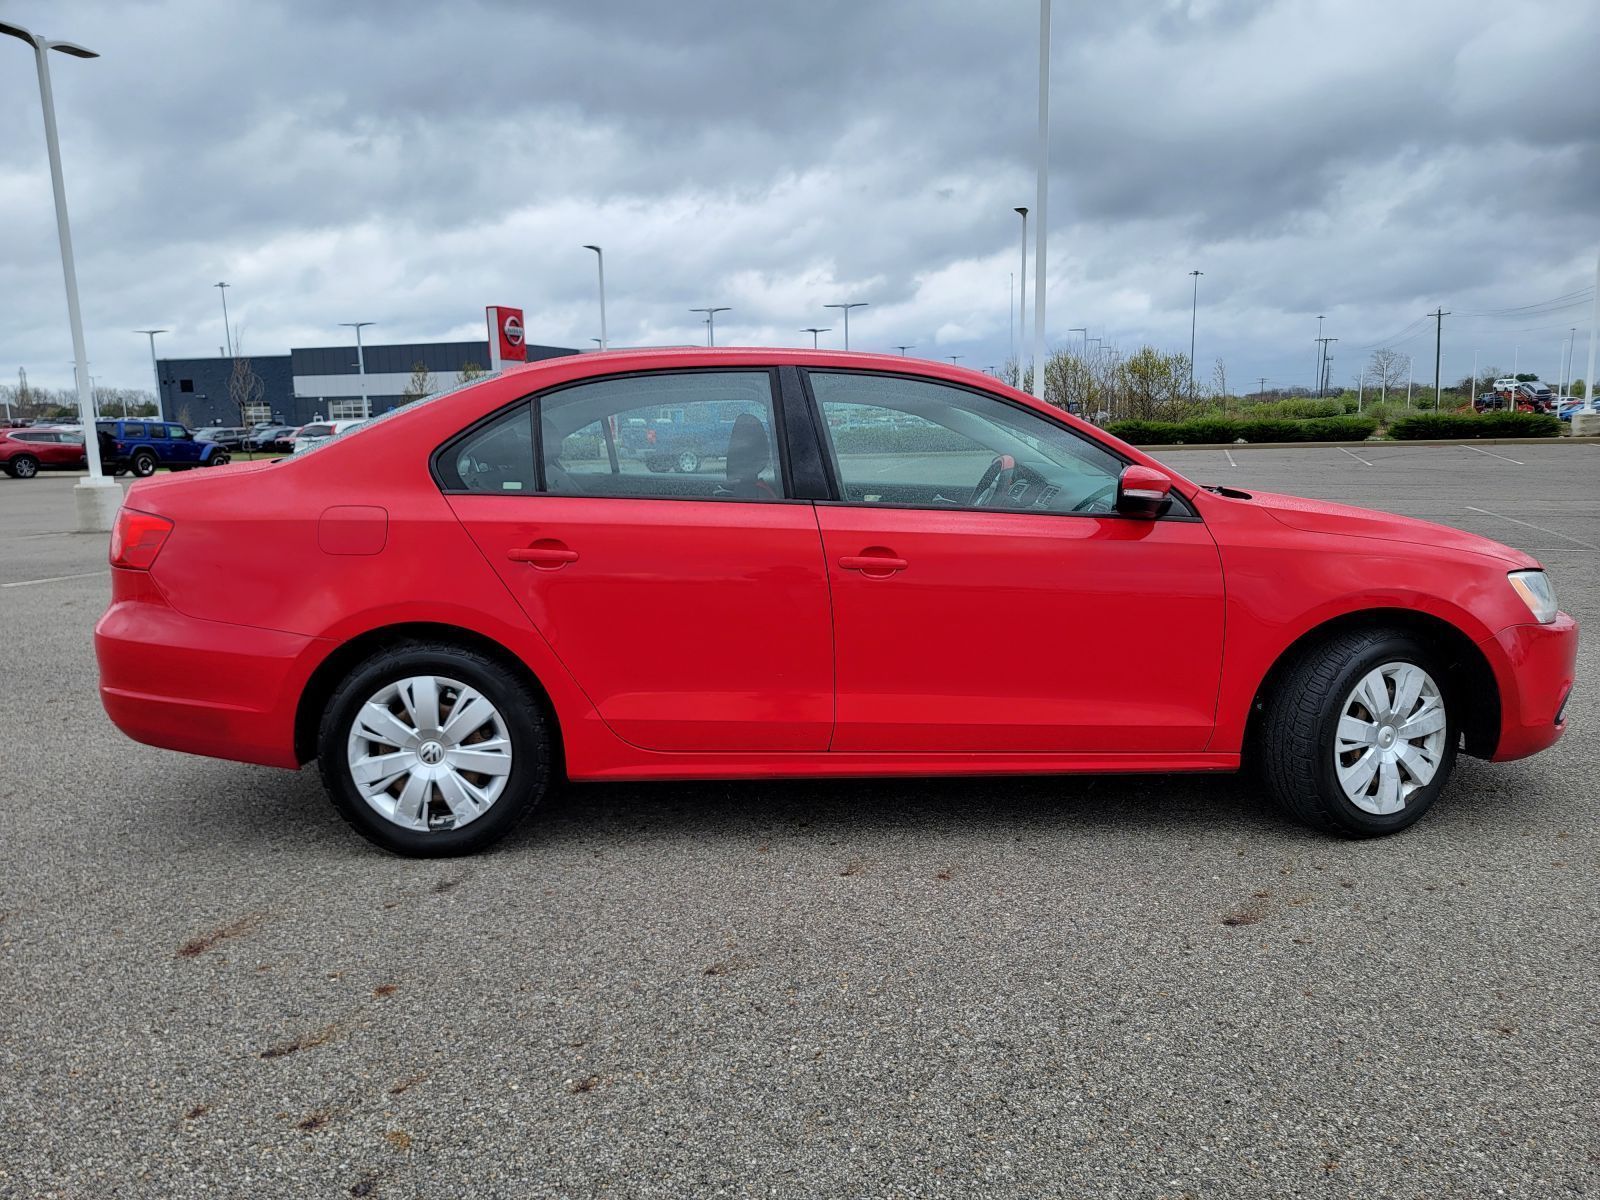 Used, 2012 Volkswagen Jetta 2.5L SE, Red, G0251A-9